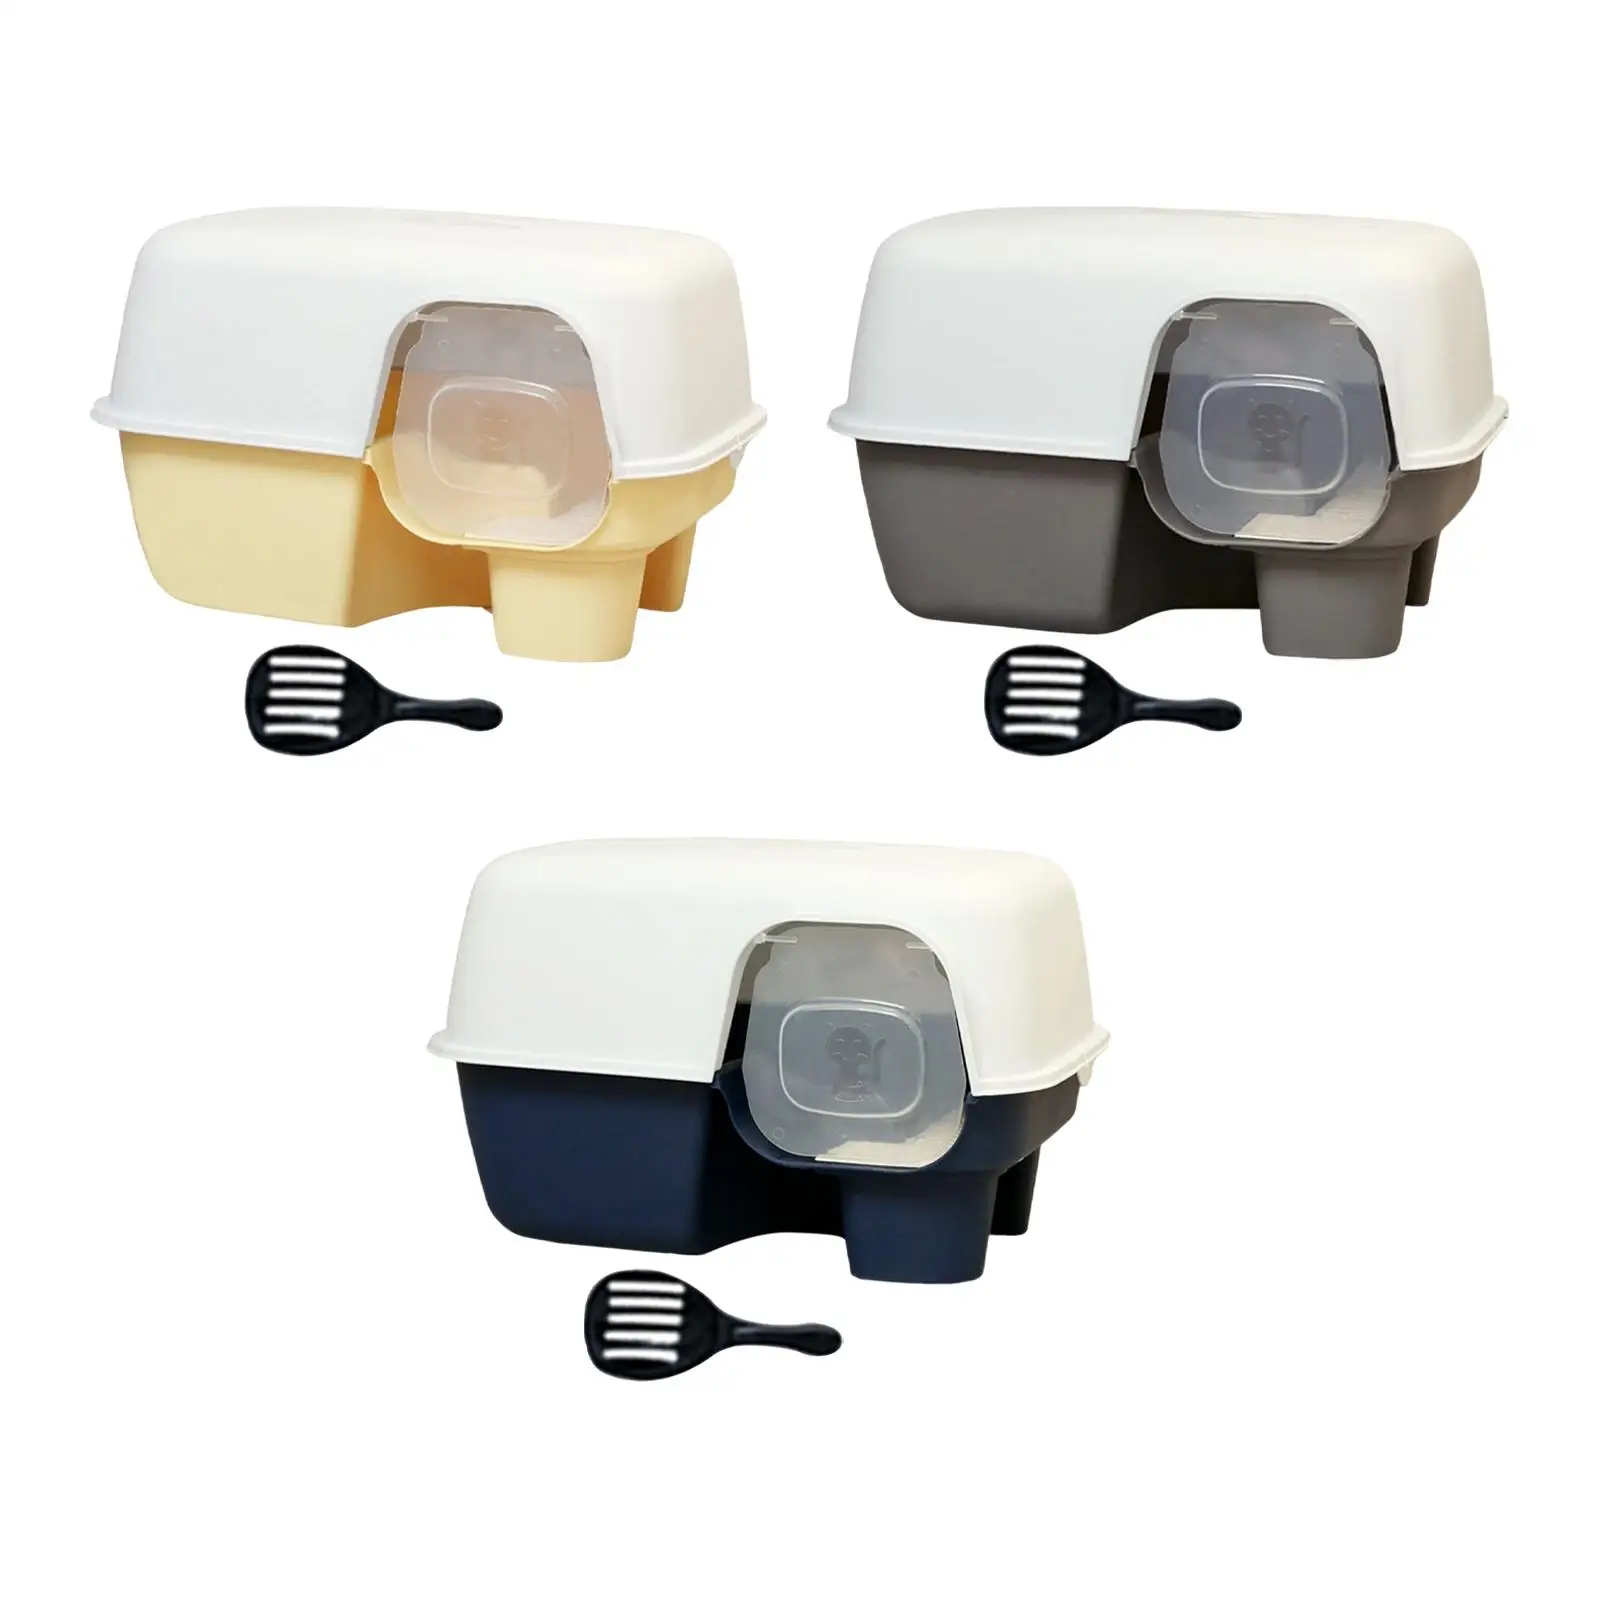 Enclosed Cat Litter Box Durable Cat Accessories Removeable Cat Bedpans with Gate Pet Litter Tray